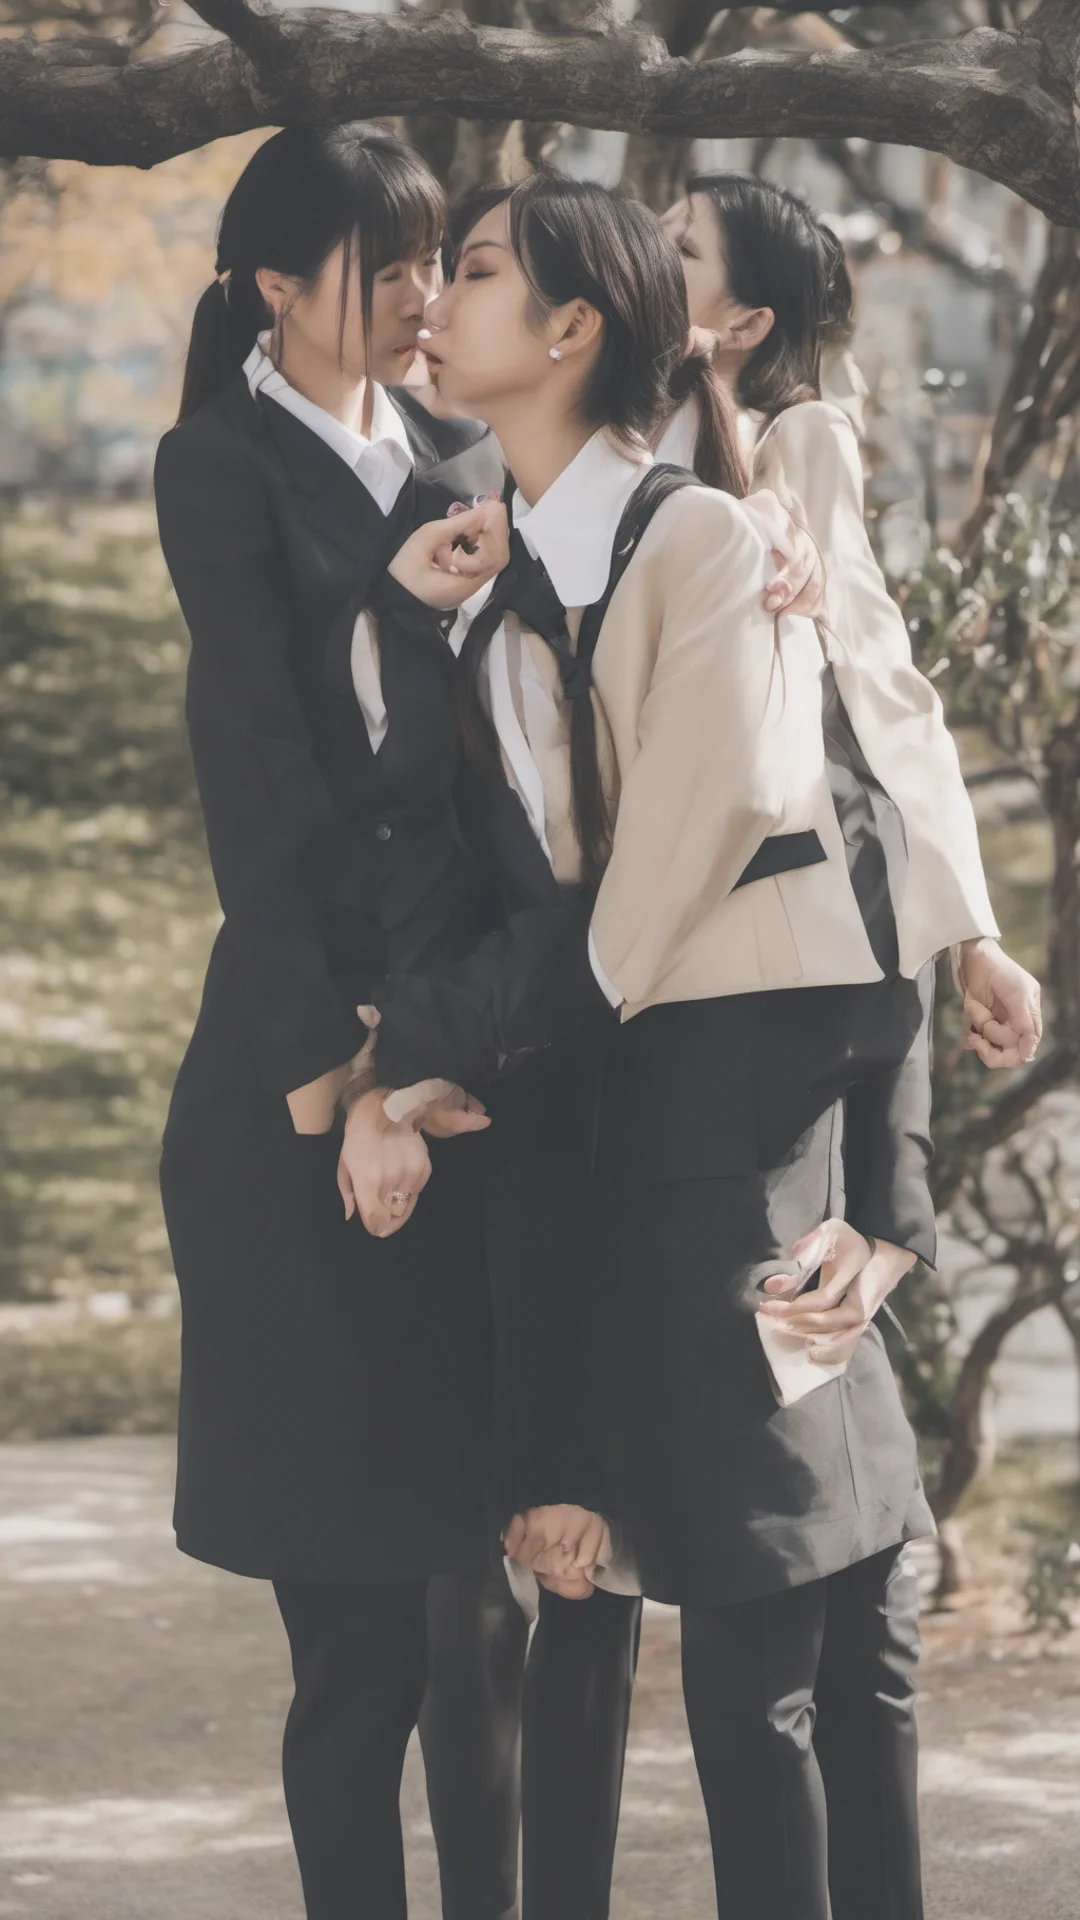 aiasian female lesbian kissing with her girlfriend wearing formal suit  good looking trending fantastic 1 tall